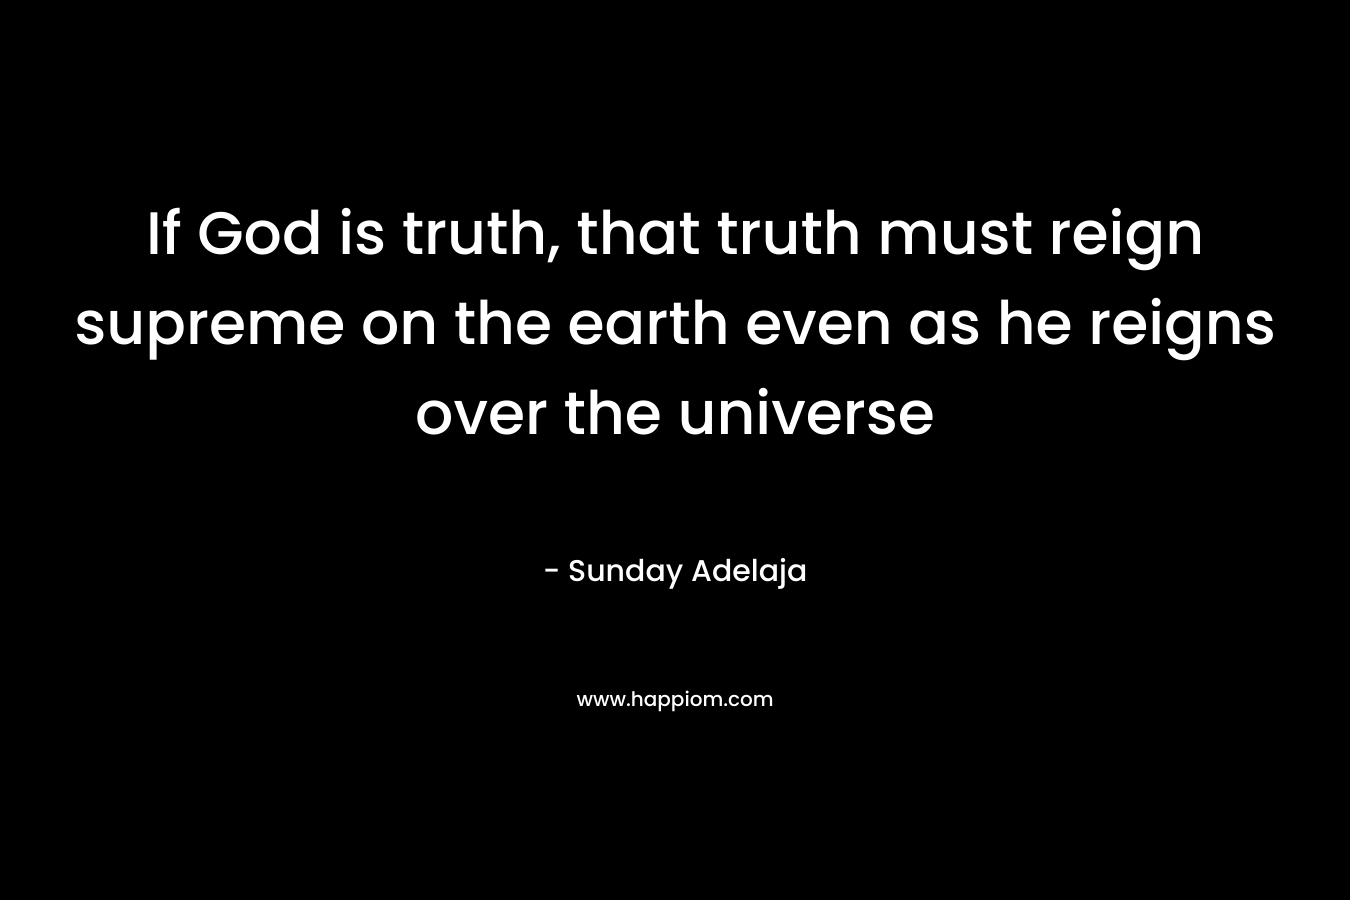 If God is truth, that truth must reign supreme on the earth even as he reigns over the universe – Sunday Adelaja